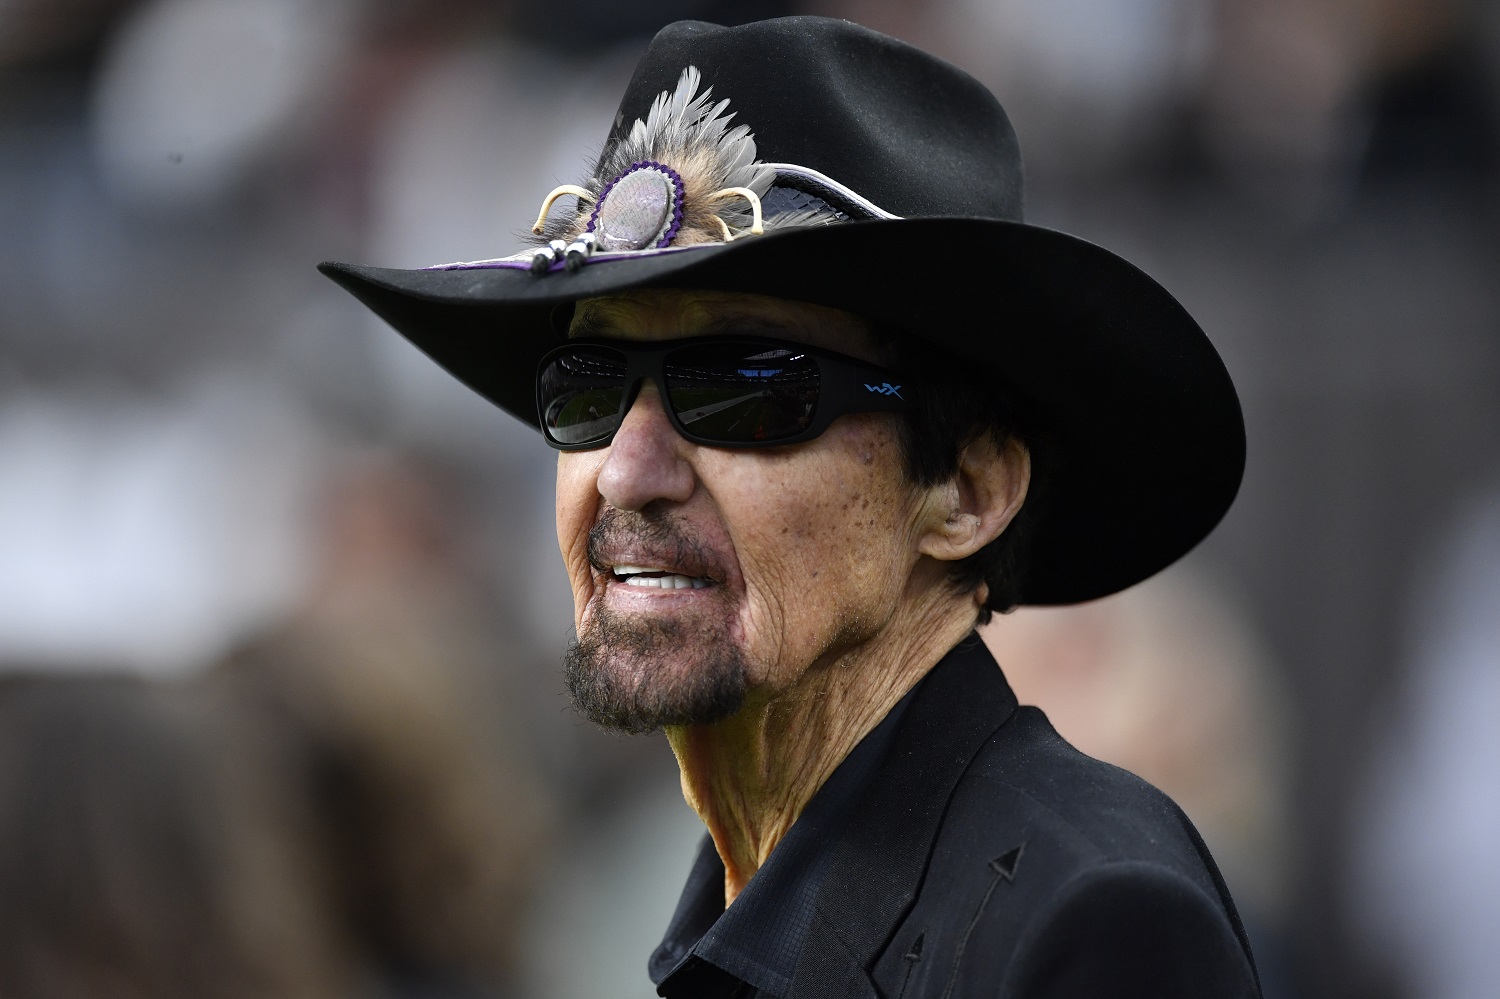 NASCAR Hall of Famer Richard Petty looks on before a game between the Las Vegas Raiders and Washington Football Team at Allegiant Stadium on Dec. 5, 2021 in Las Vegas, Nevada. | Chris Unger/Getty Images